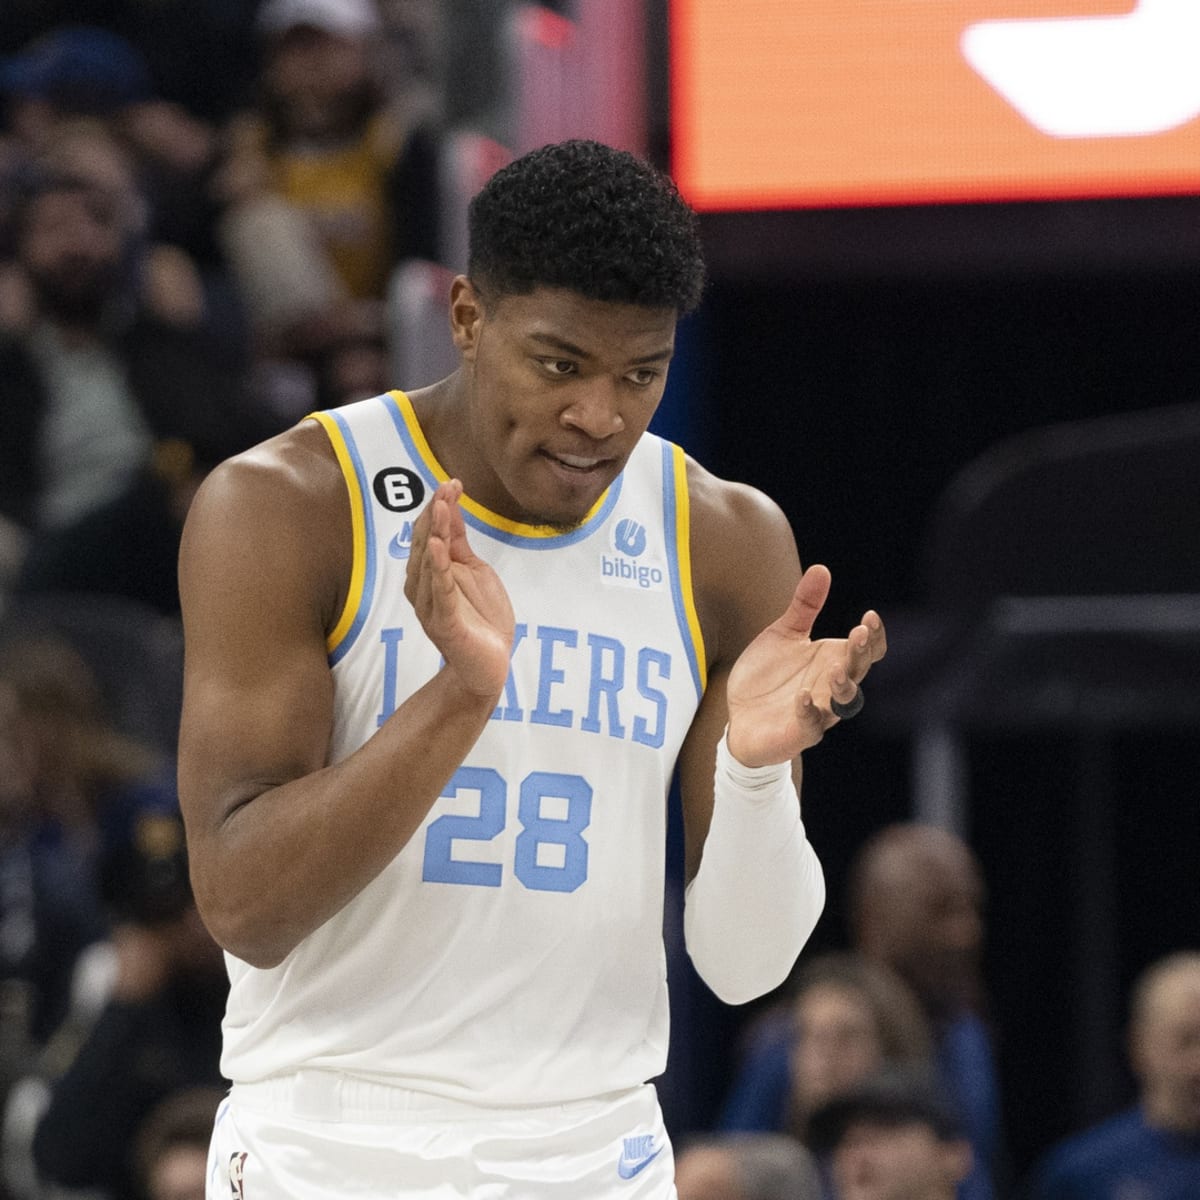 Why did the Lakers' Rui Hachimura choose to wear the No. 28 jersey